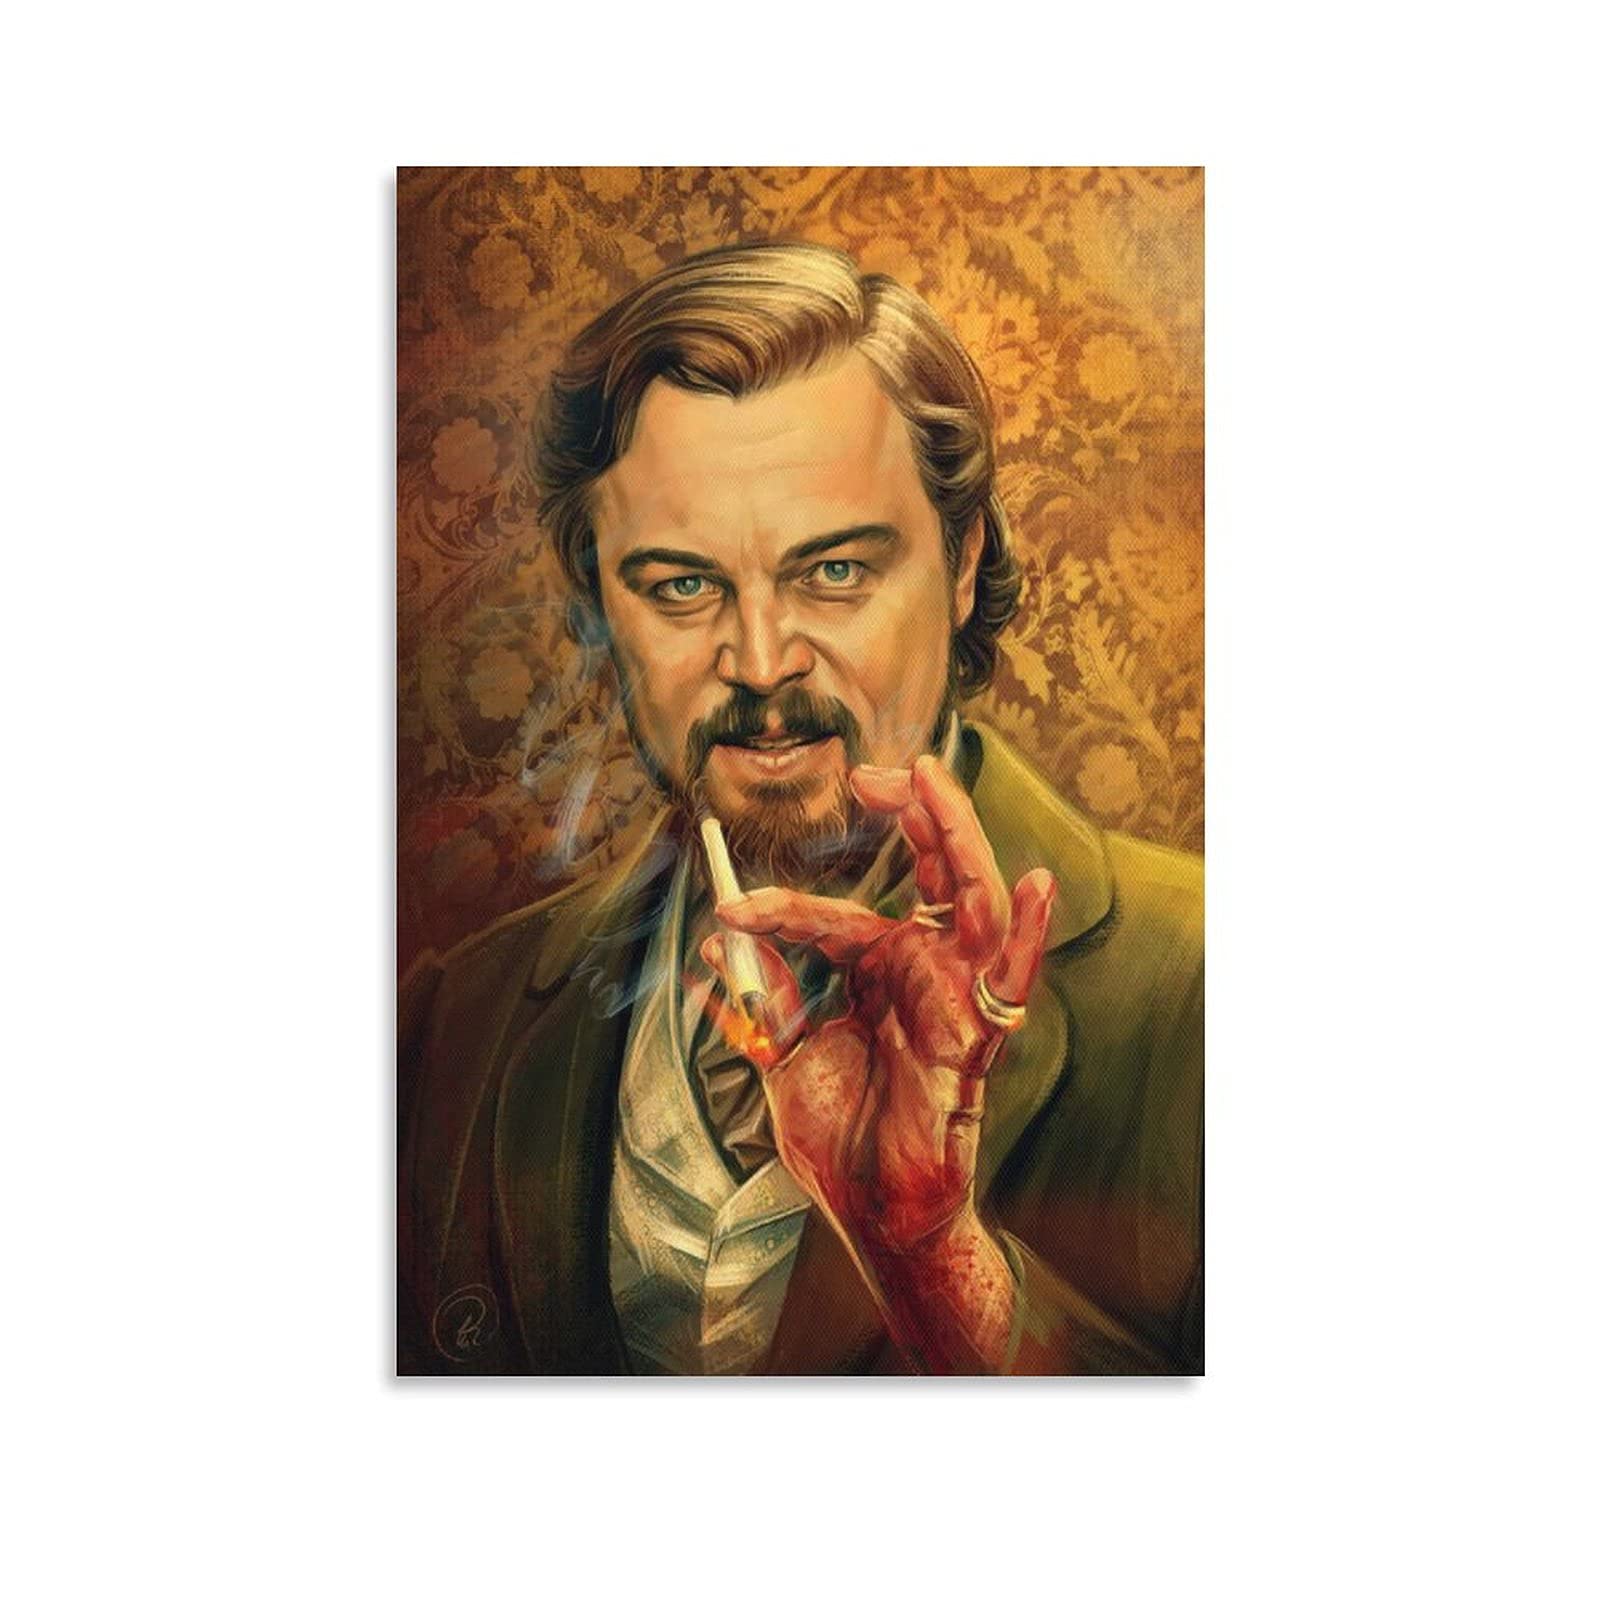 ZHUOSHI Django Unchained Classic Western Spirit Film Art Poster Leonardo DiCaprio Django Unchained Paiting Painting On Canvas Wall, 12x18inch(30x45cm): Posters & Prints